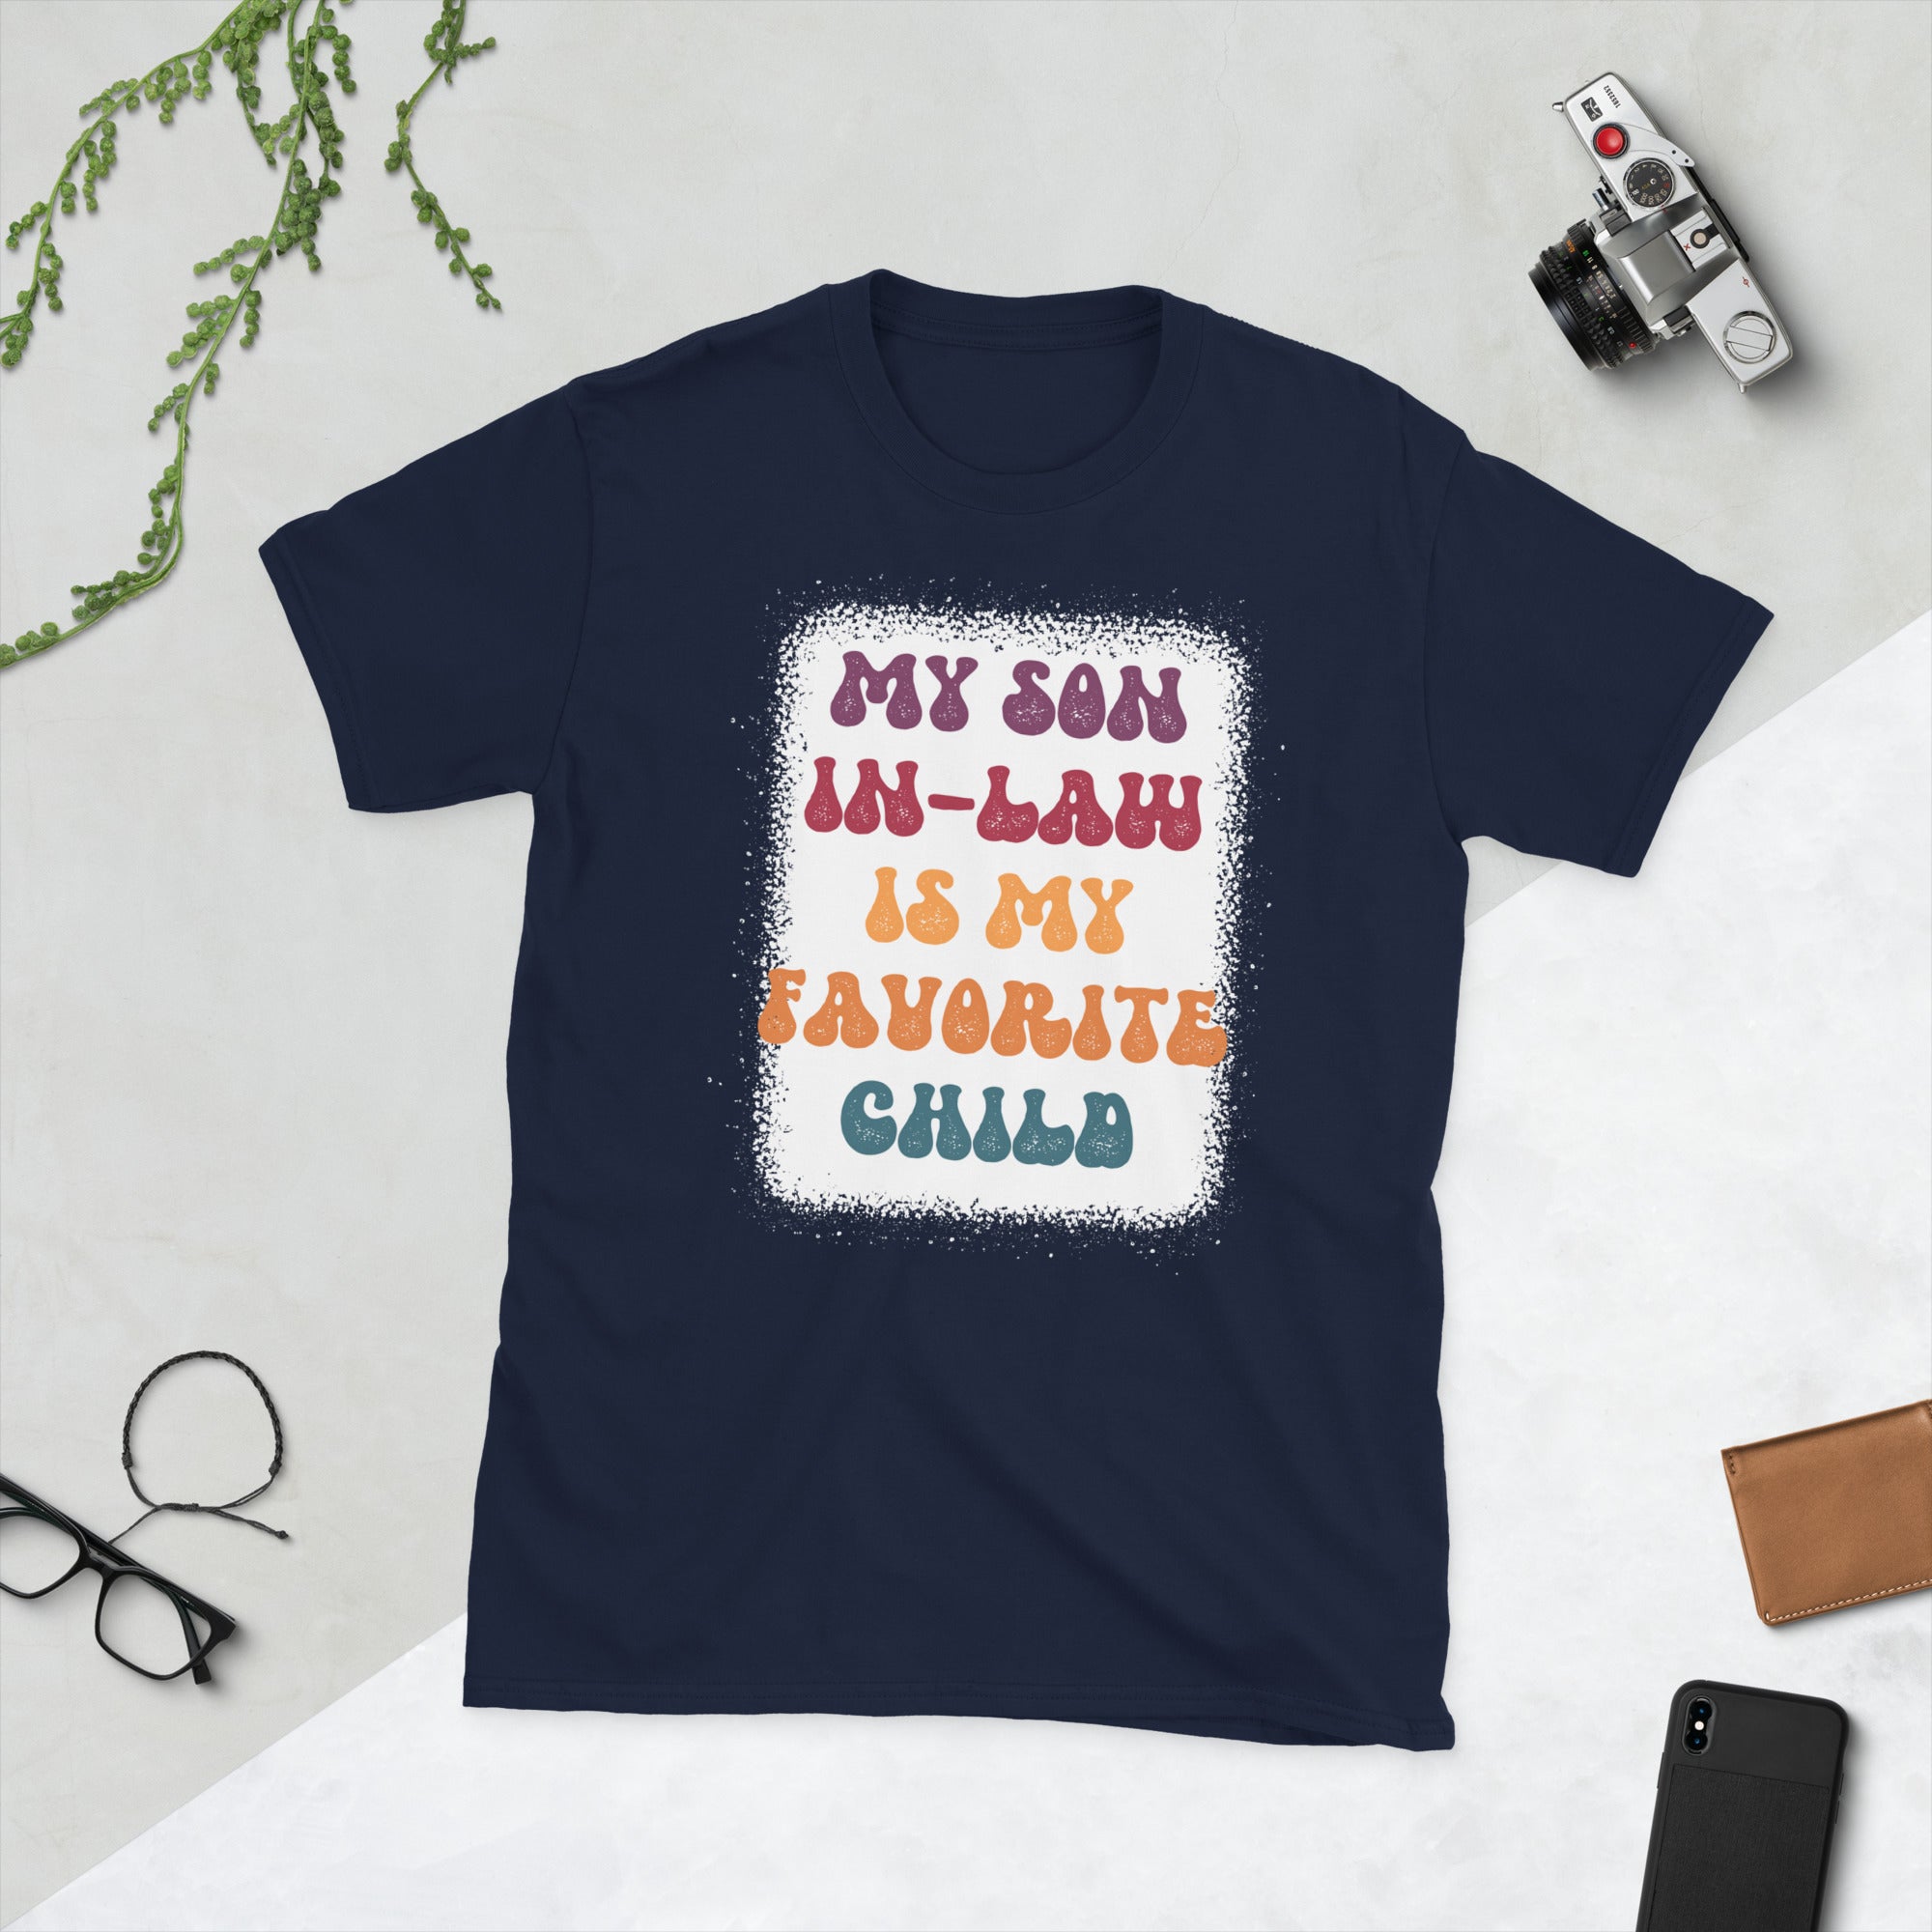 My Son In Law Is My Favorite Child Funny Shirt, Mother In Law Groovy Shirt, Funny Family T-shirt, Funny Son Tee, Gift For Father In Law